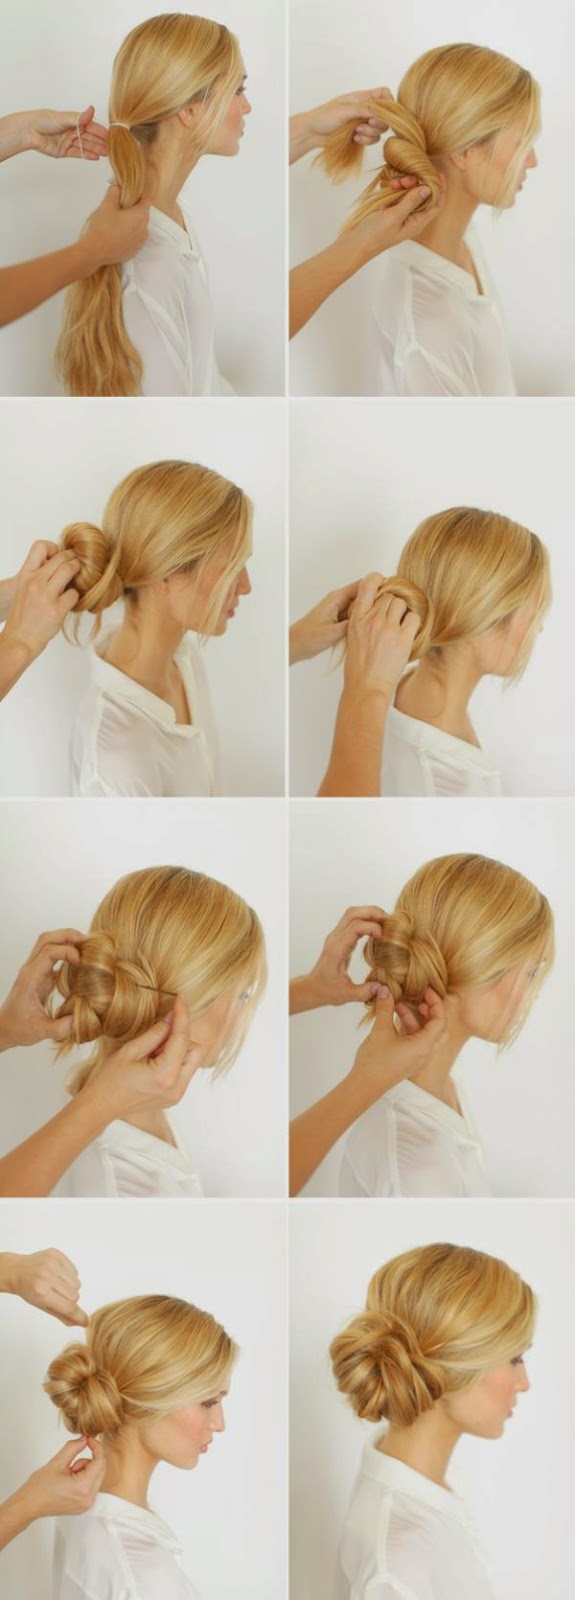 Hairstyles and Women Attire 5 Easy Messy Buns For Long Hair Tutorial